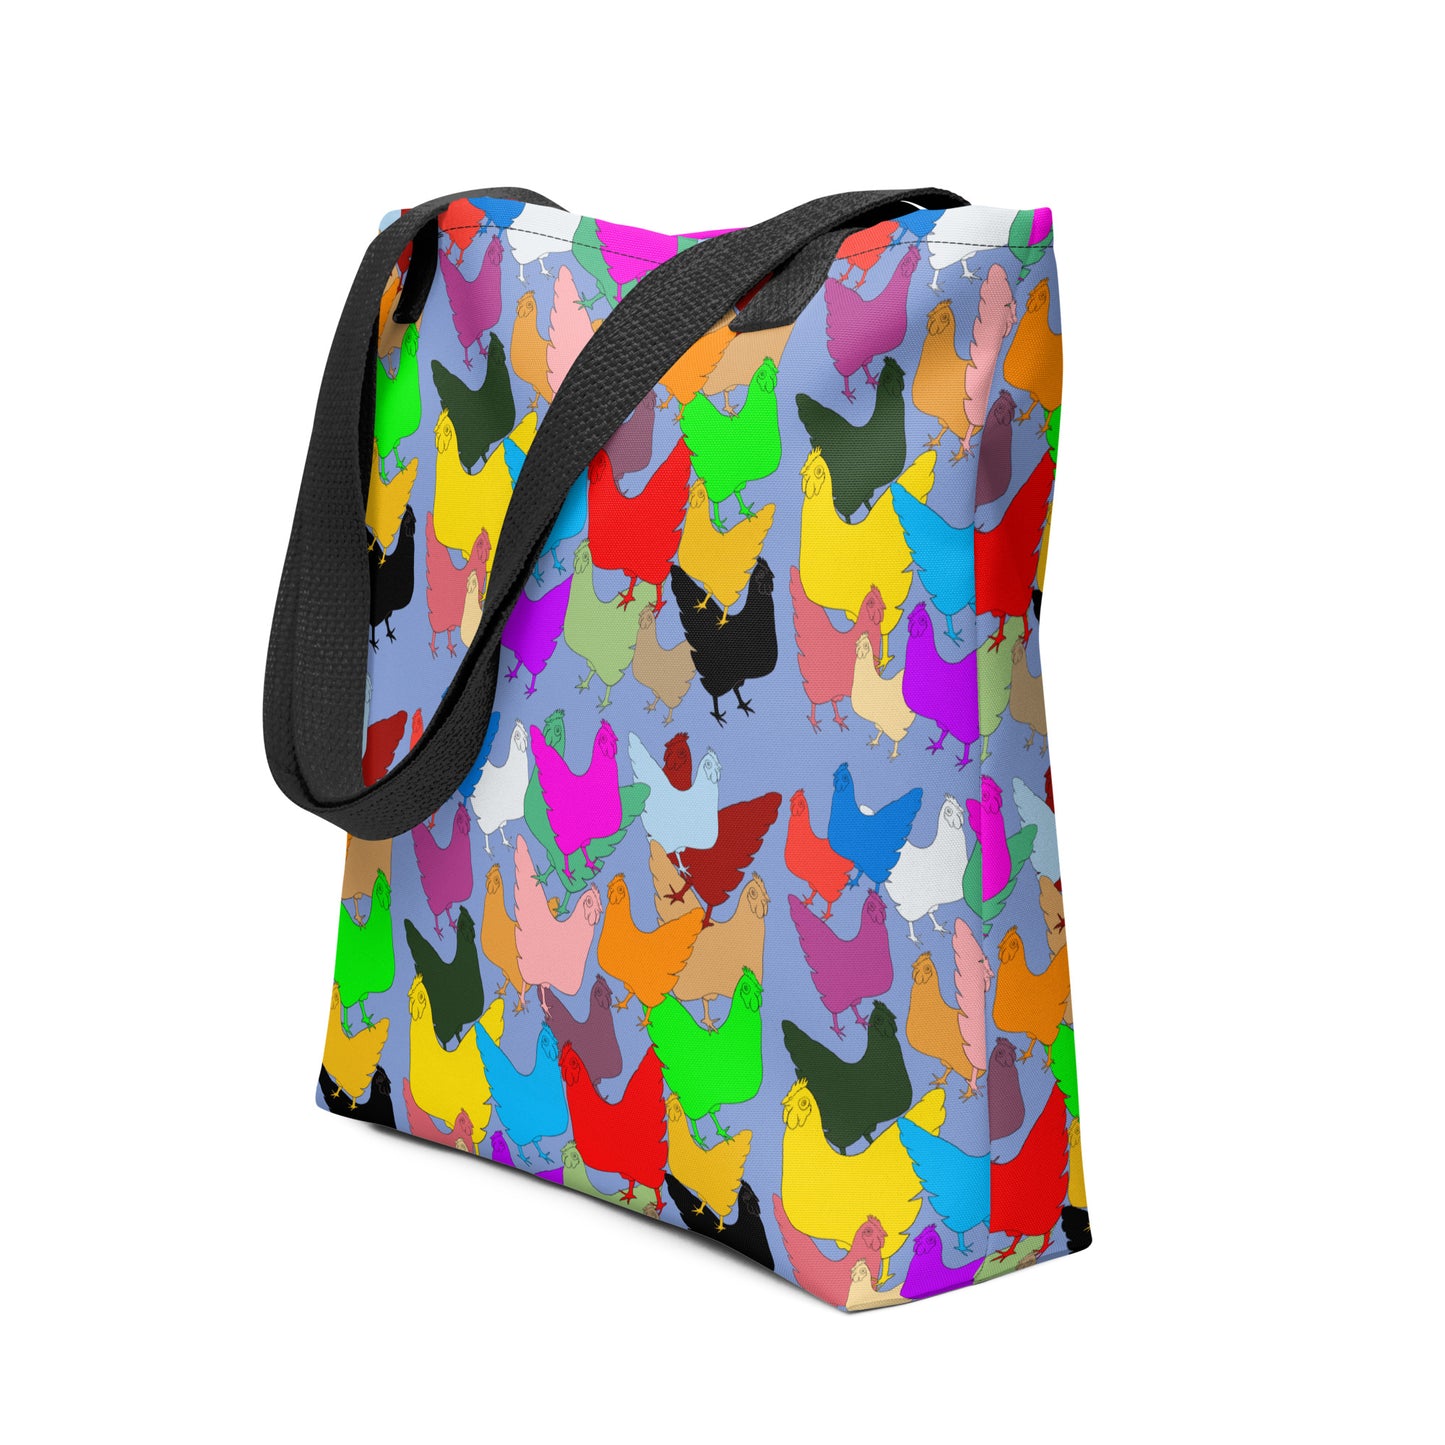 Colorful Chicken Soup Tote bag